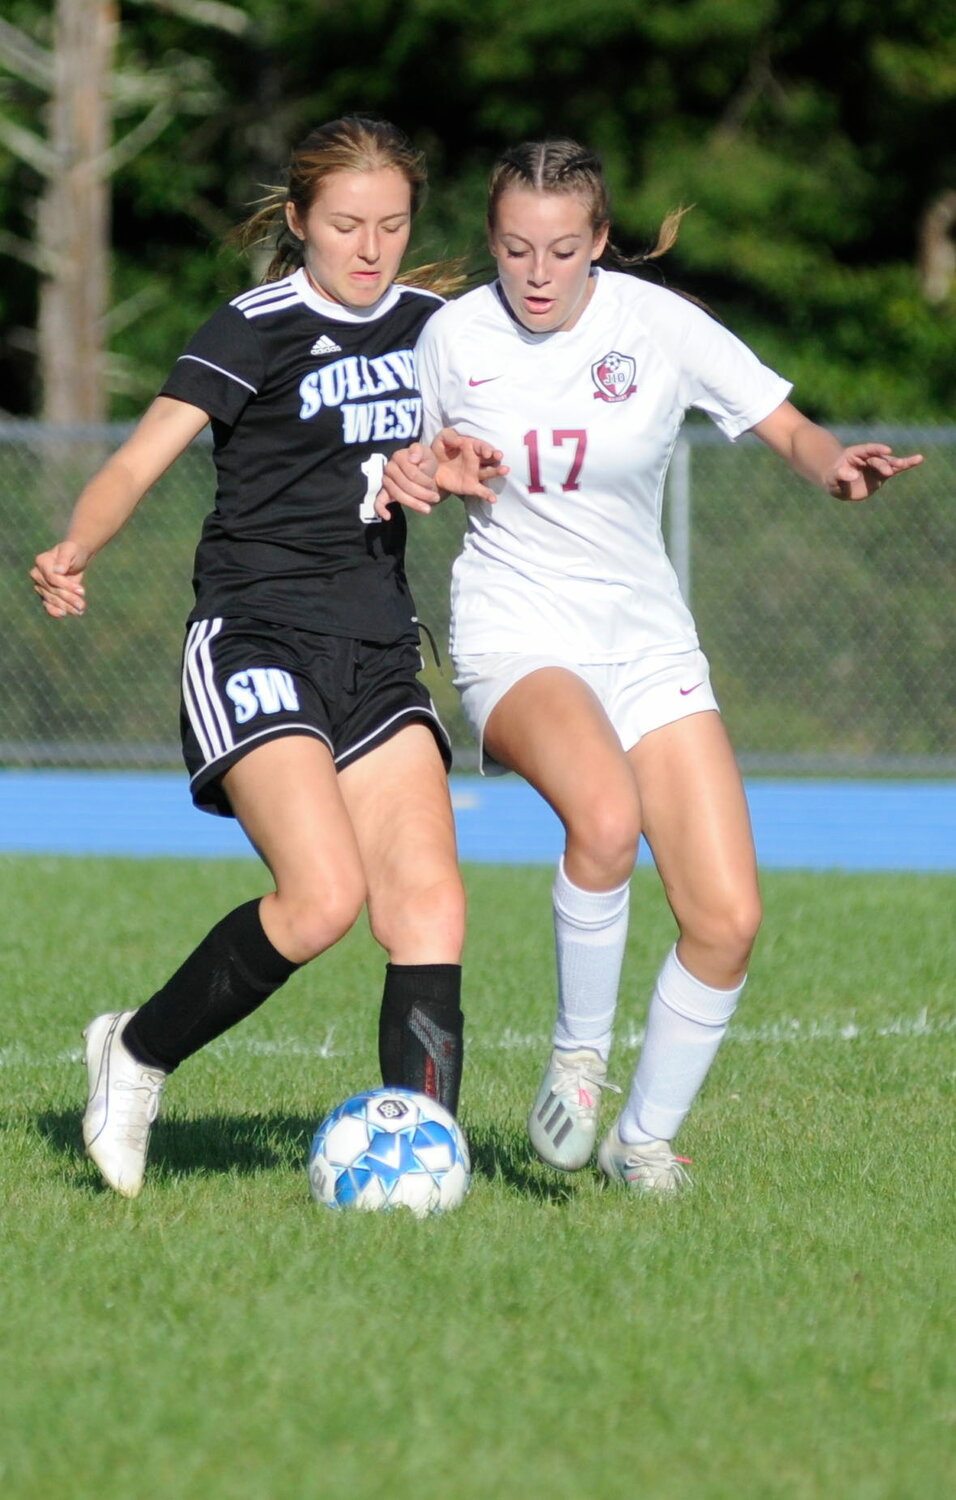 One on one. Sullivan West’s Nicole Reeves and O’Neill’s Madelyn Zdeb.